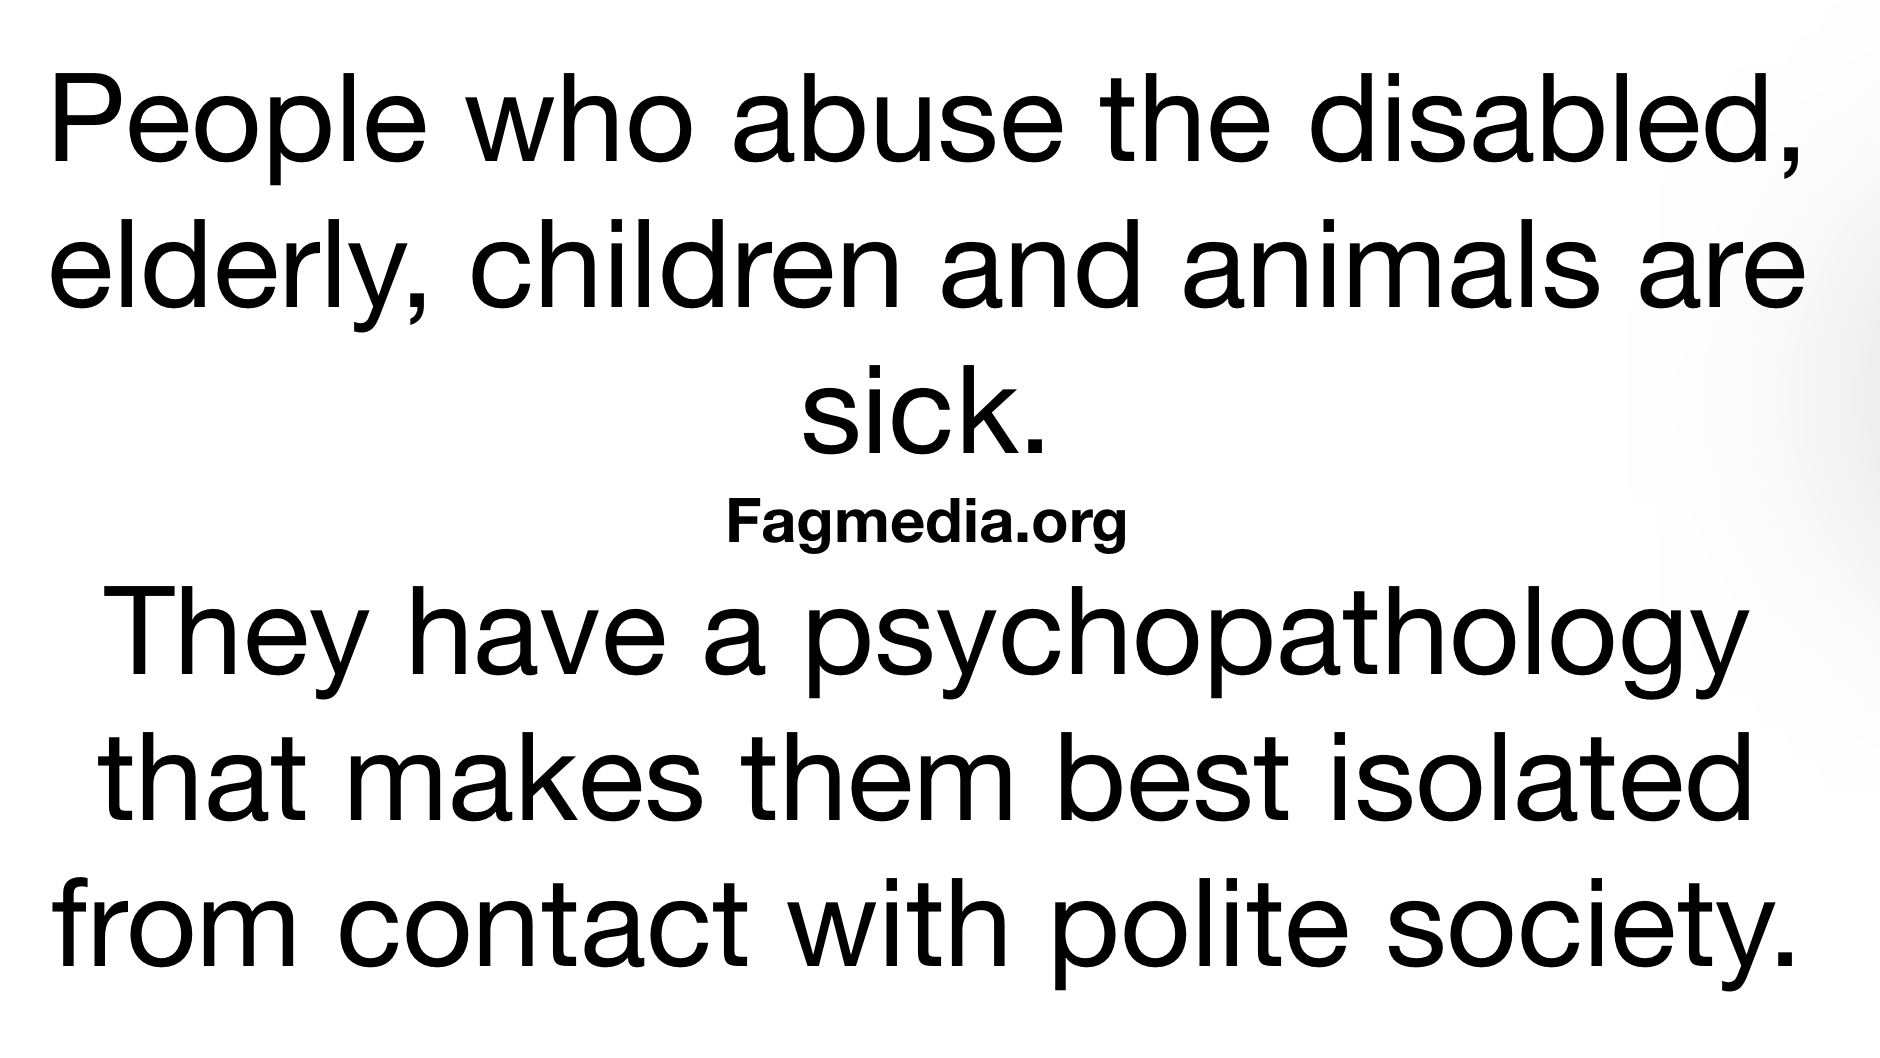 People who Abuse the Disabled Elderly Children and Animals are Sick